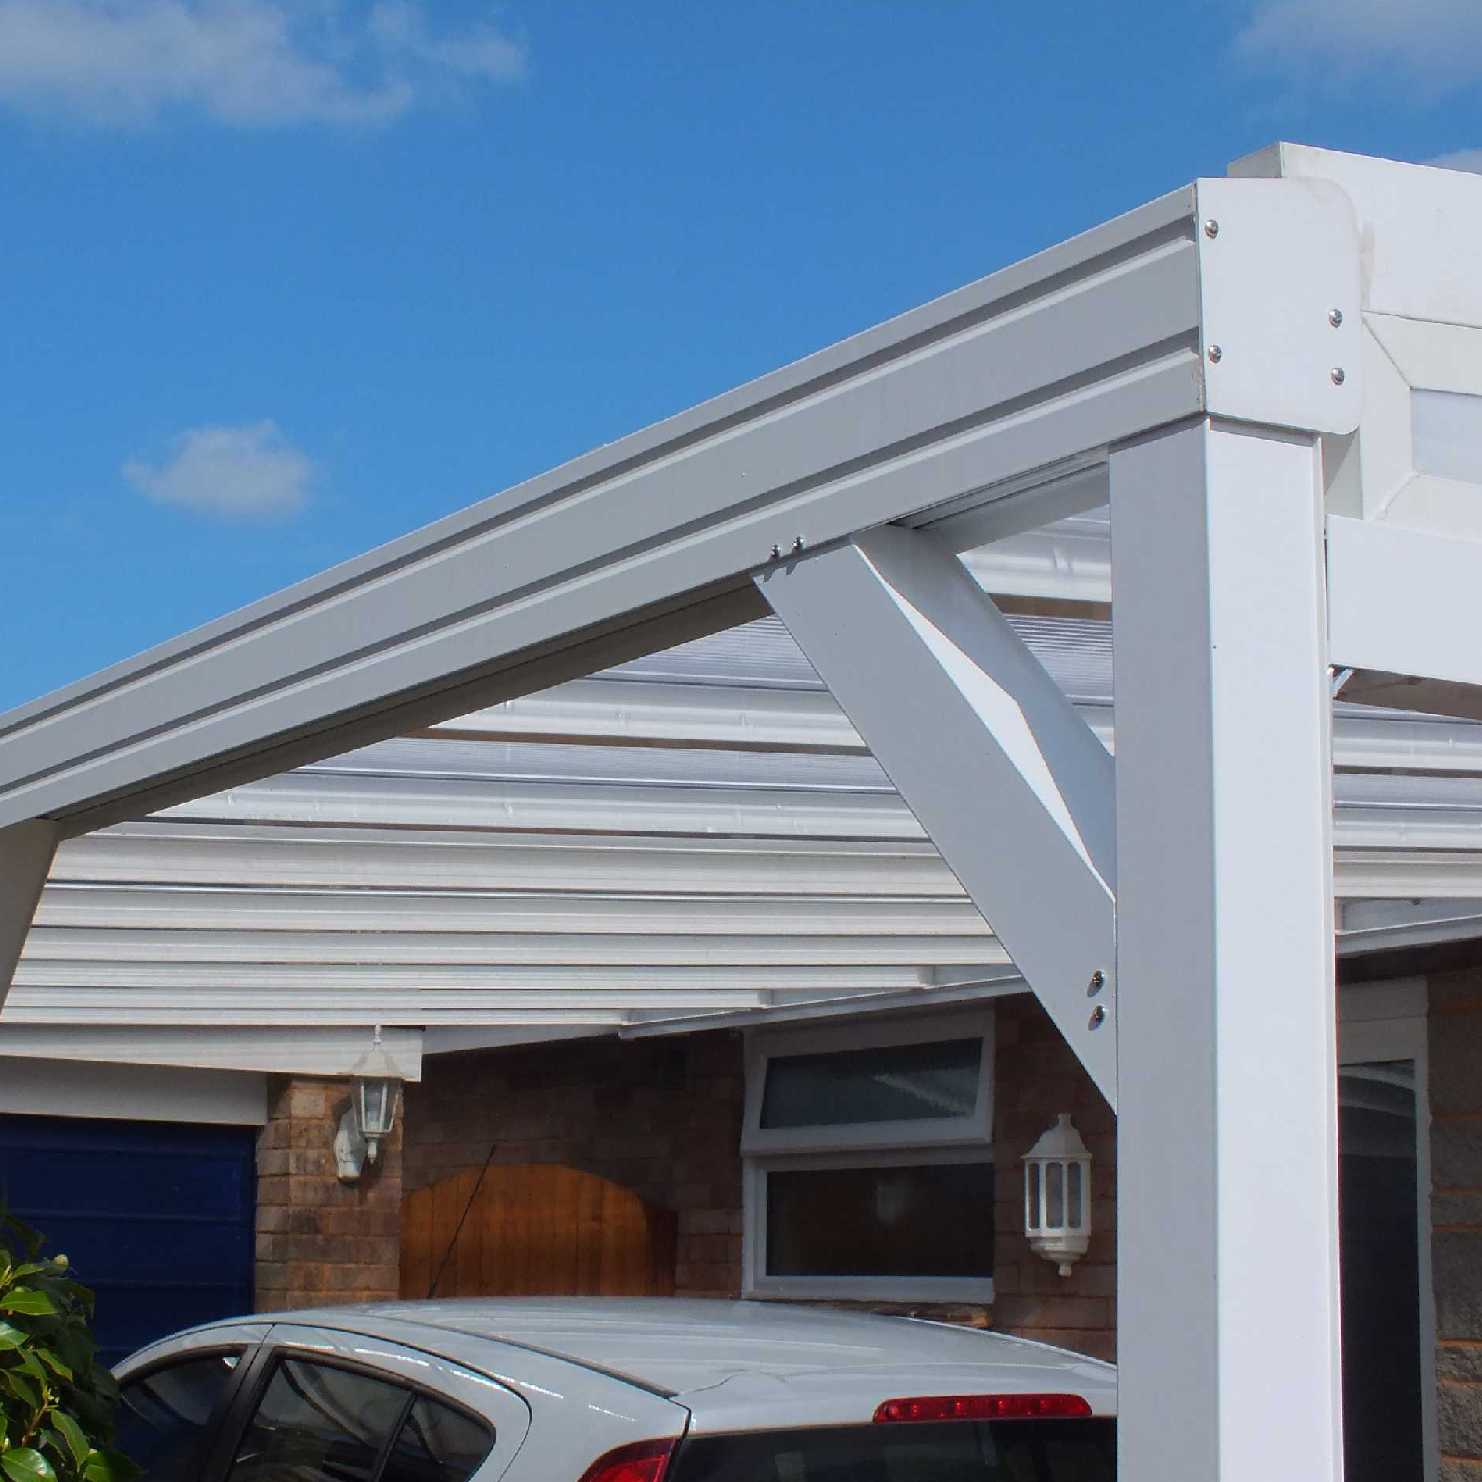 Buy Omega Smart Lean-To Canopy, White with 16mm Polycarbonate Glazing - 11.6m (W) x 2.5m (P), (5) Supporting Posts online today